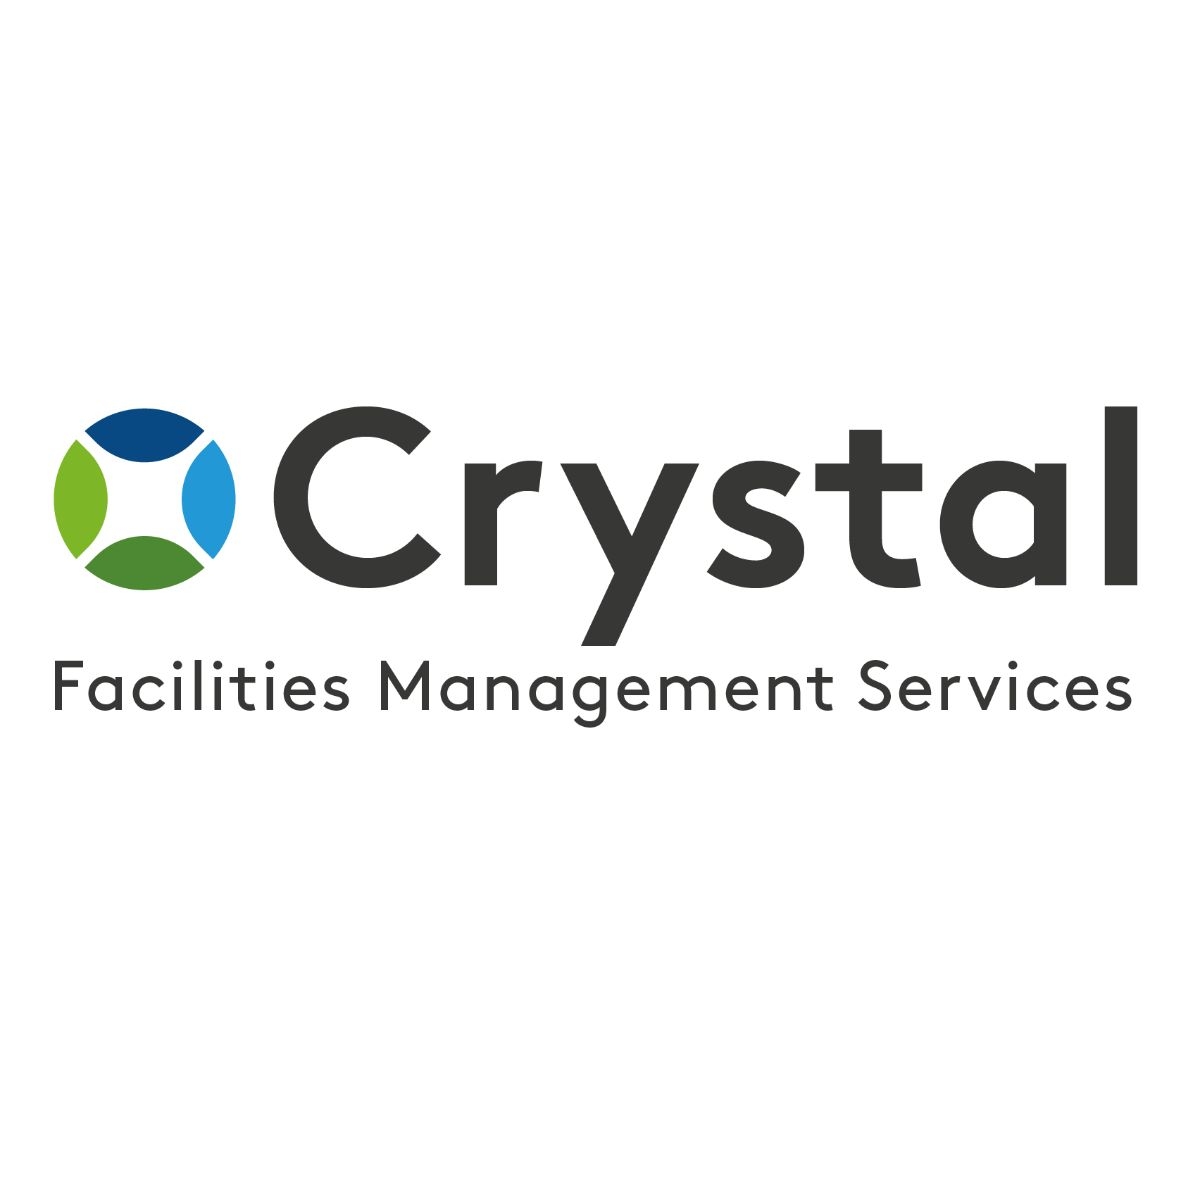 Crystal Facilities Management